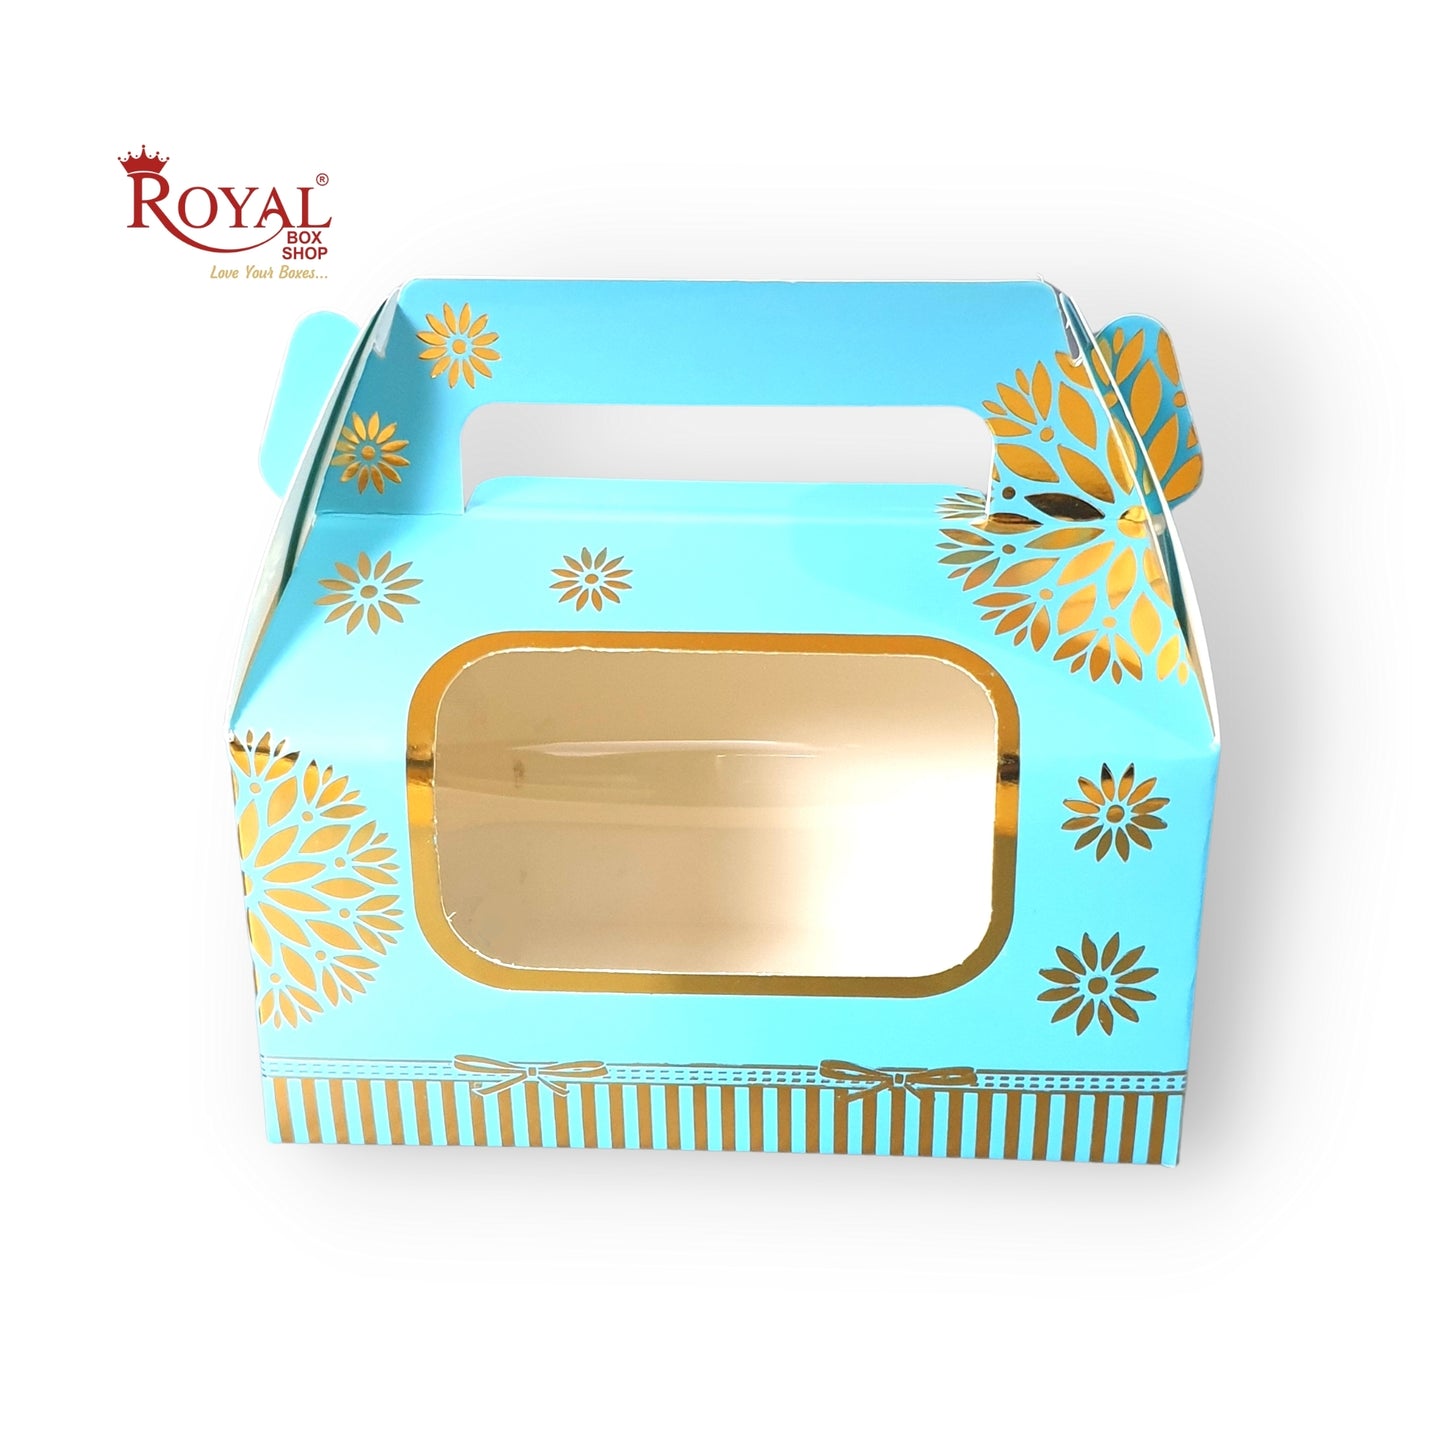 2 Jar Box With Handle I Blue Gold Foiling Print I 7"x3.5"x3.5" inches I For Return Favor Gifts, Dryfruits Gift Bags